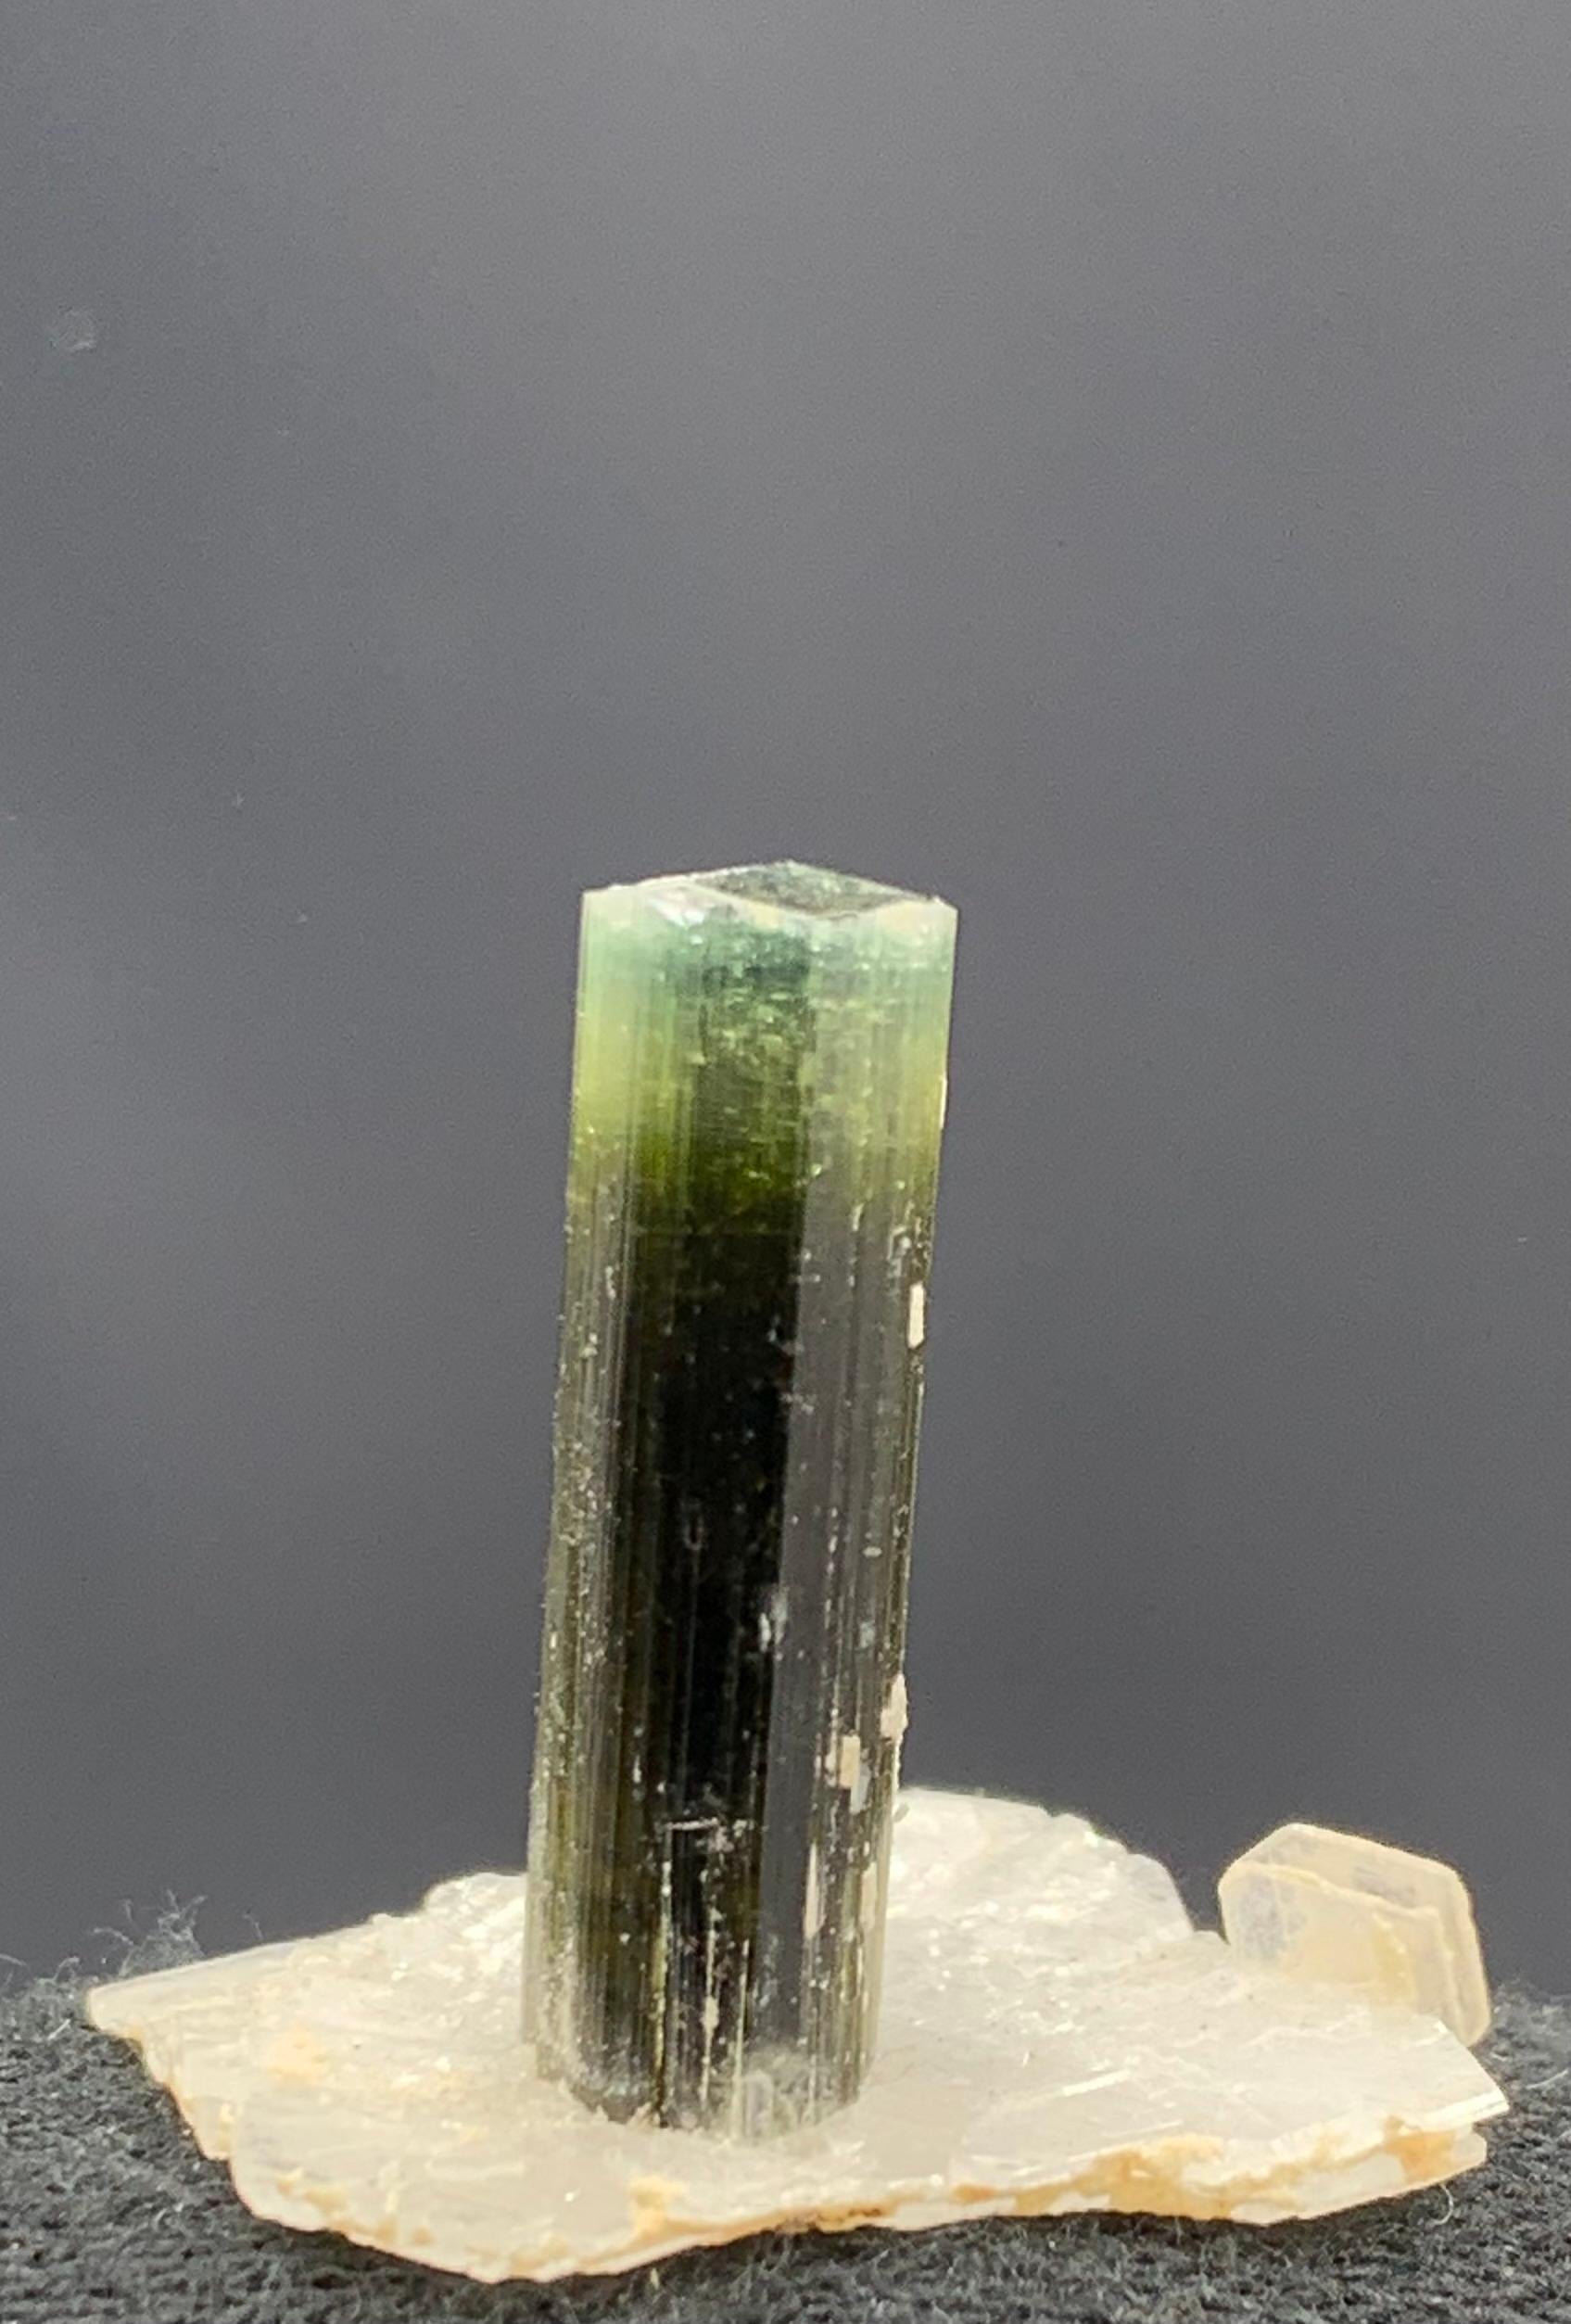 2.56 Gram Elegant Tourmaline Crystal Attached With Albite From Pakistan 

Weight: 2.56 Gram
Dimension: 2.2 x 2.2 x 1.6 Cm
Origin: Stak Nala, Skardu district, Pakistan 

Tourmaline is a crystalline silicate mineral group in which boron is compounded